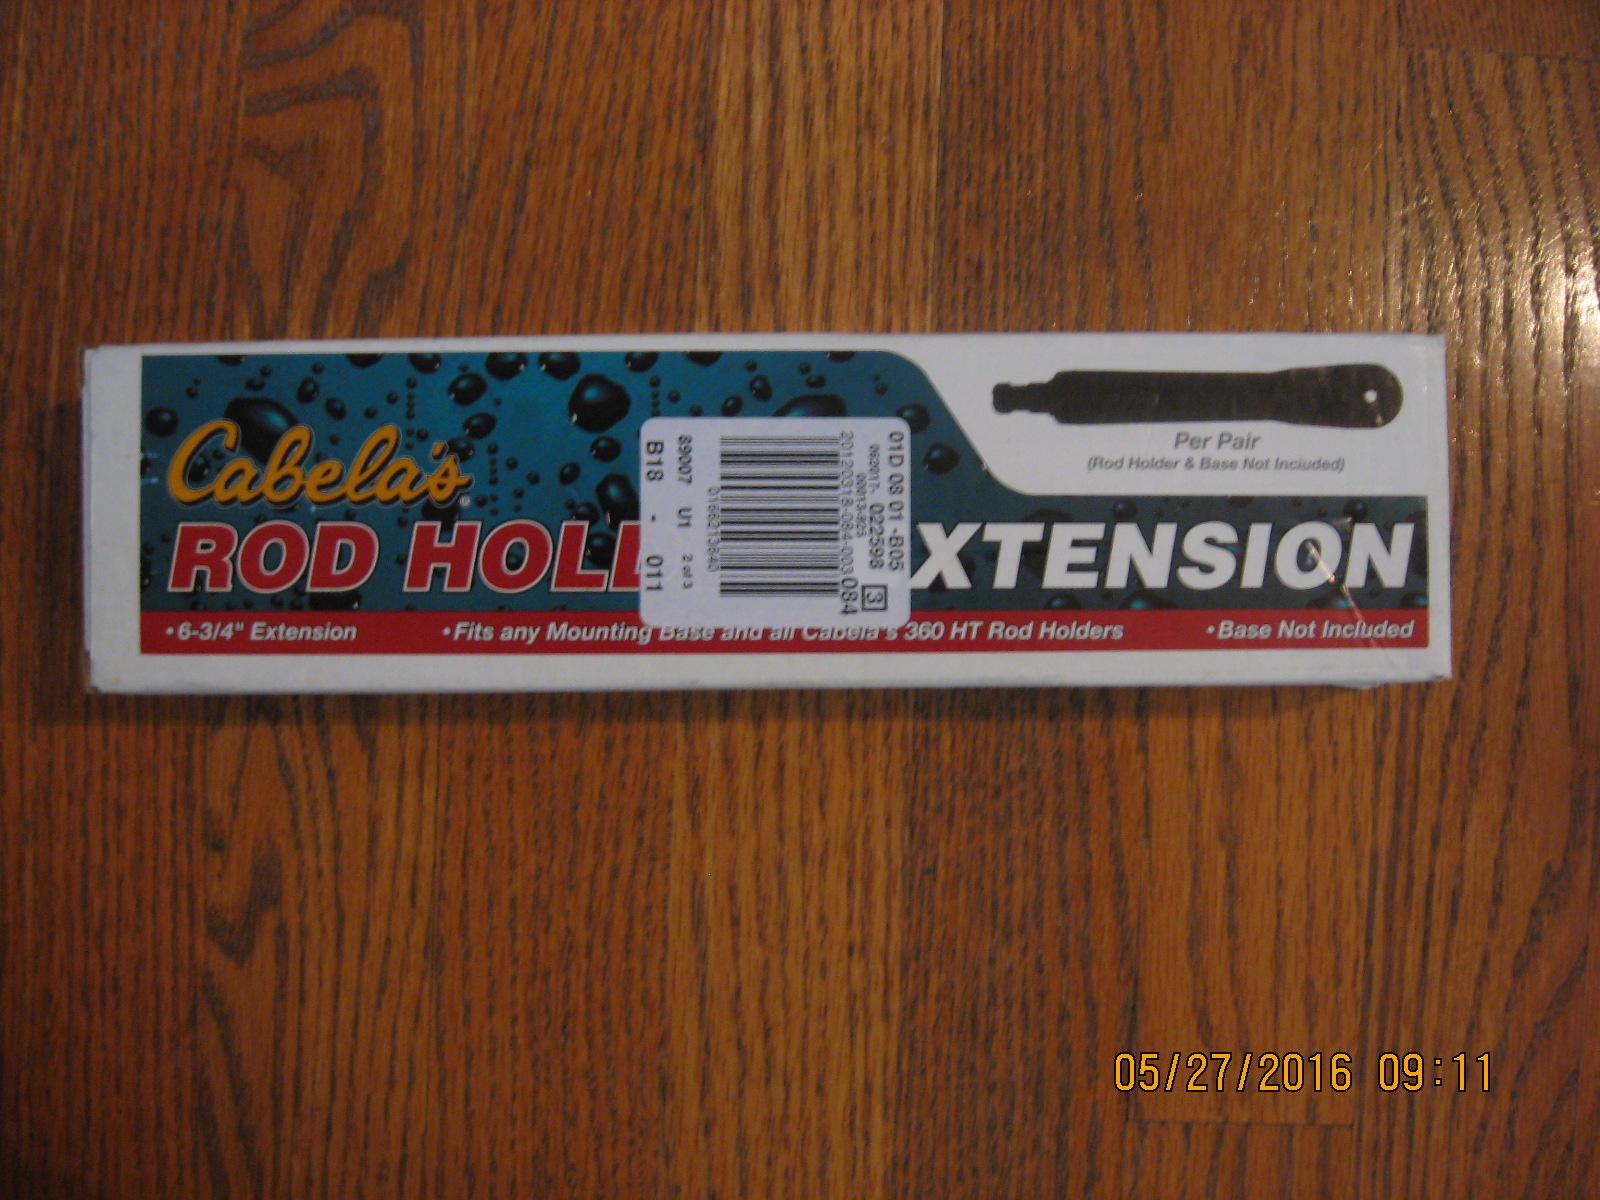 rod holder extensions for cabela's scotty rod holders